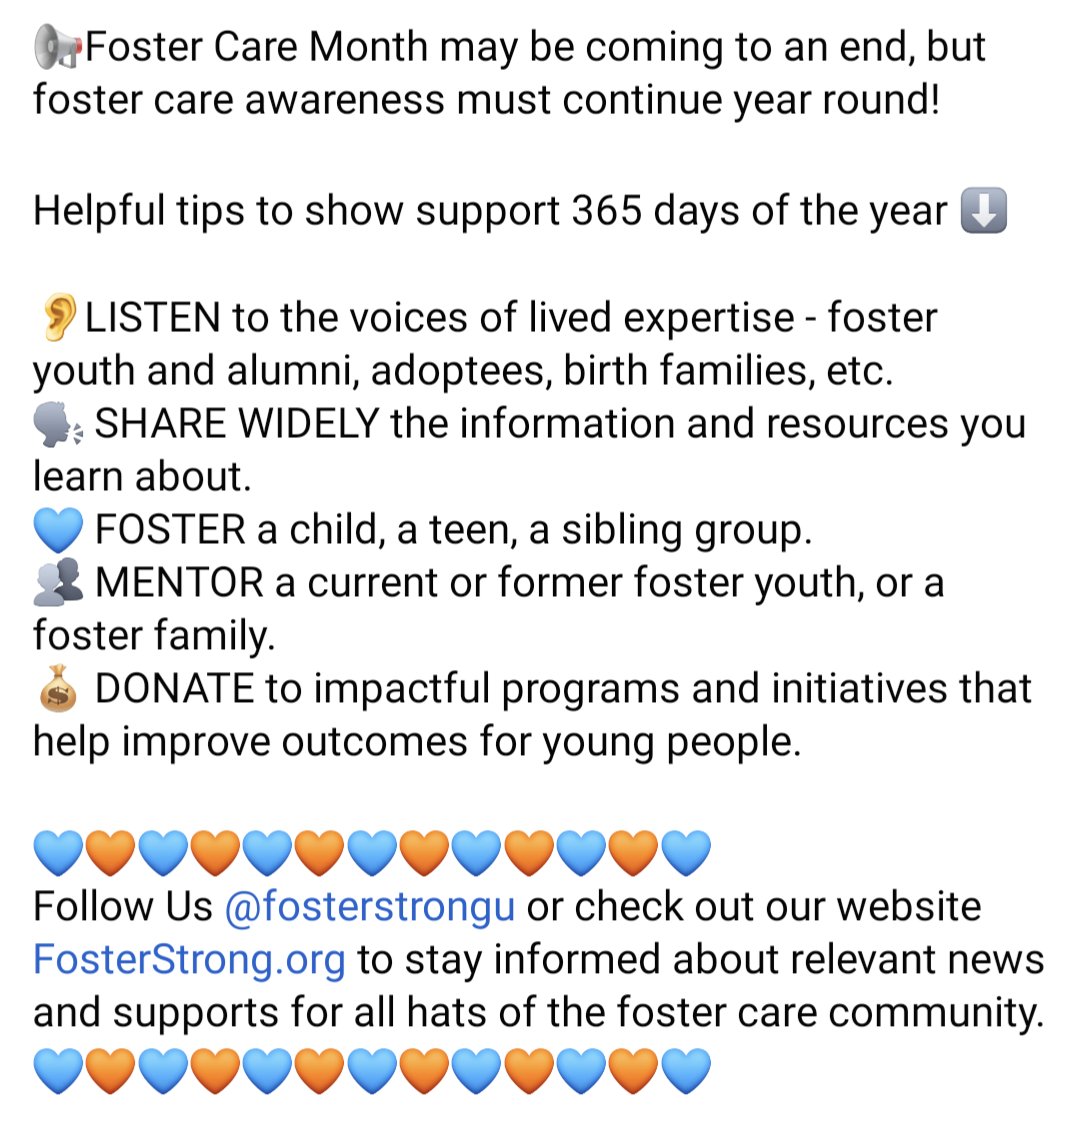 📢#FosterCareMonth may be coming to an end, but #fostercareawareness must continue year round!
👂LISTEN
🗣️ SHARE
💙 FOSTER
👥 MENTOR
💰 DONATE

🧡💙 Follow Us @fosterstrongu or check out our website FosterStrong.org 🧡💙

#fostercare #community #collaboration #resources